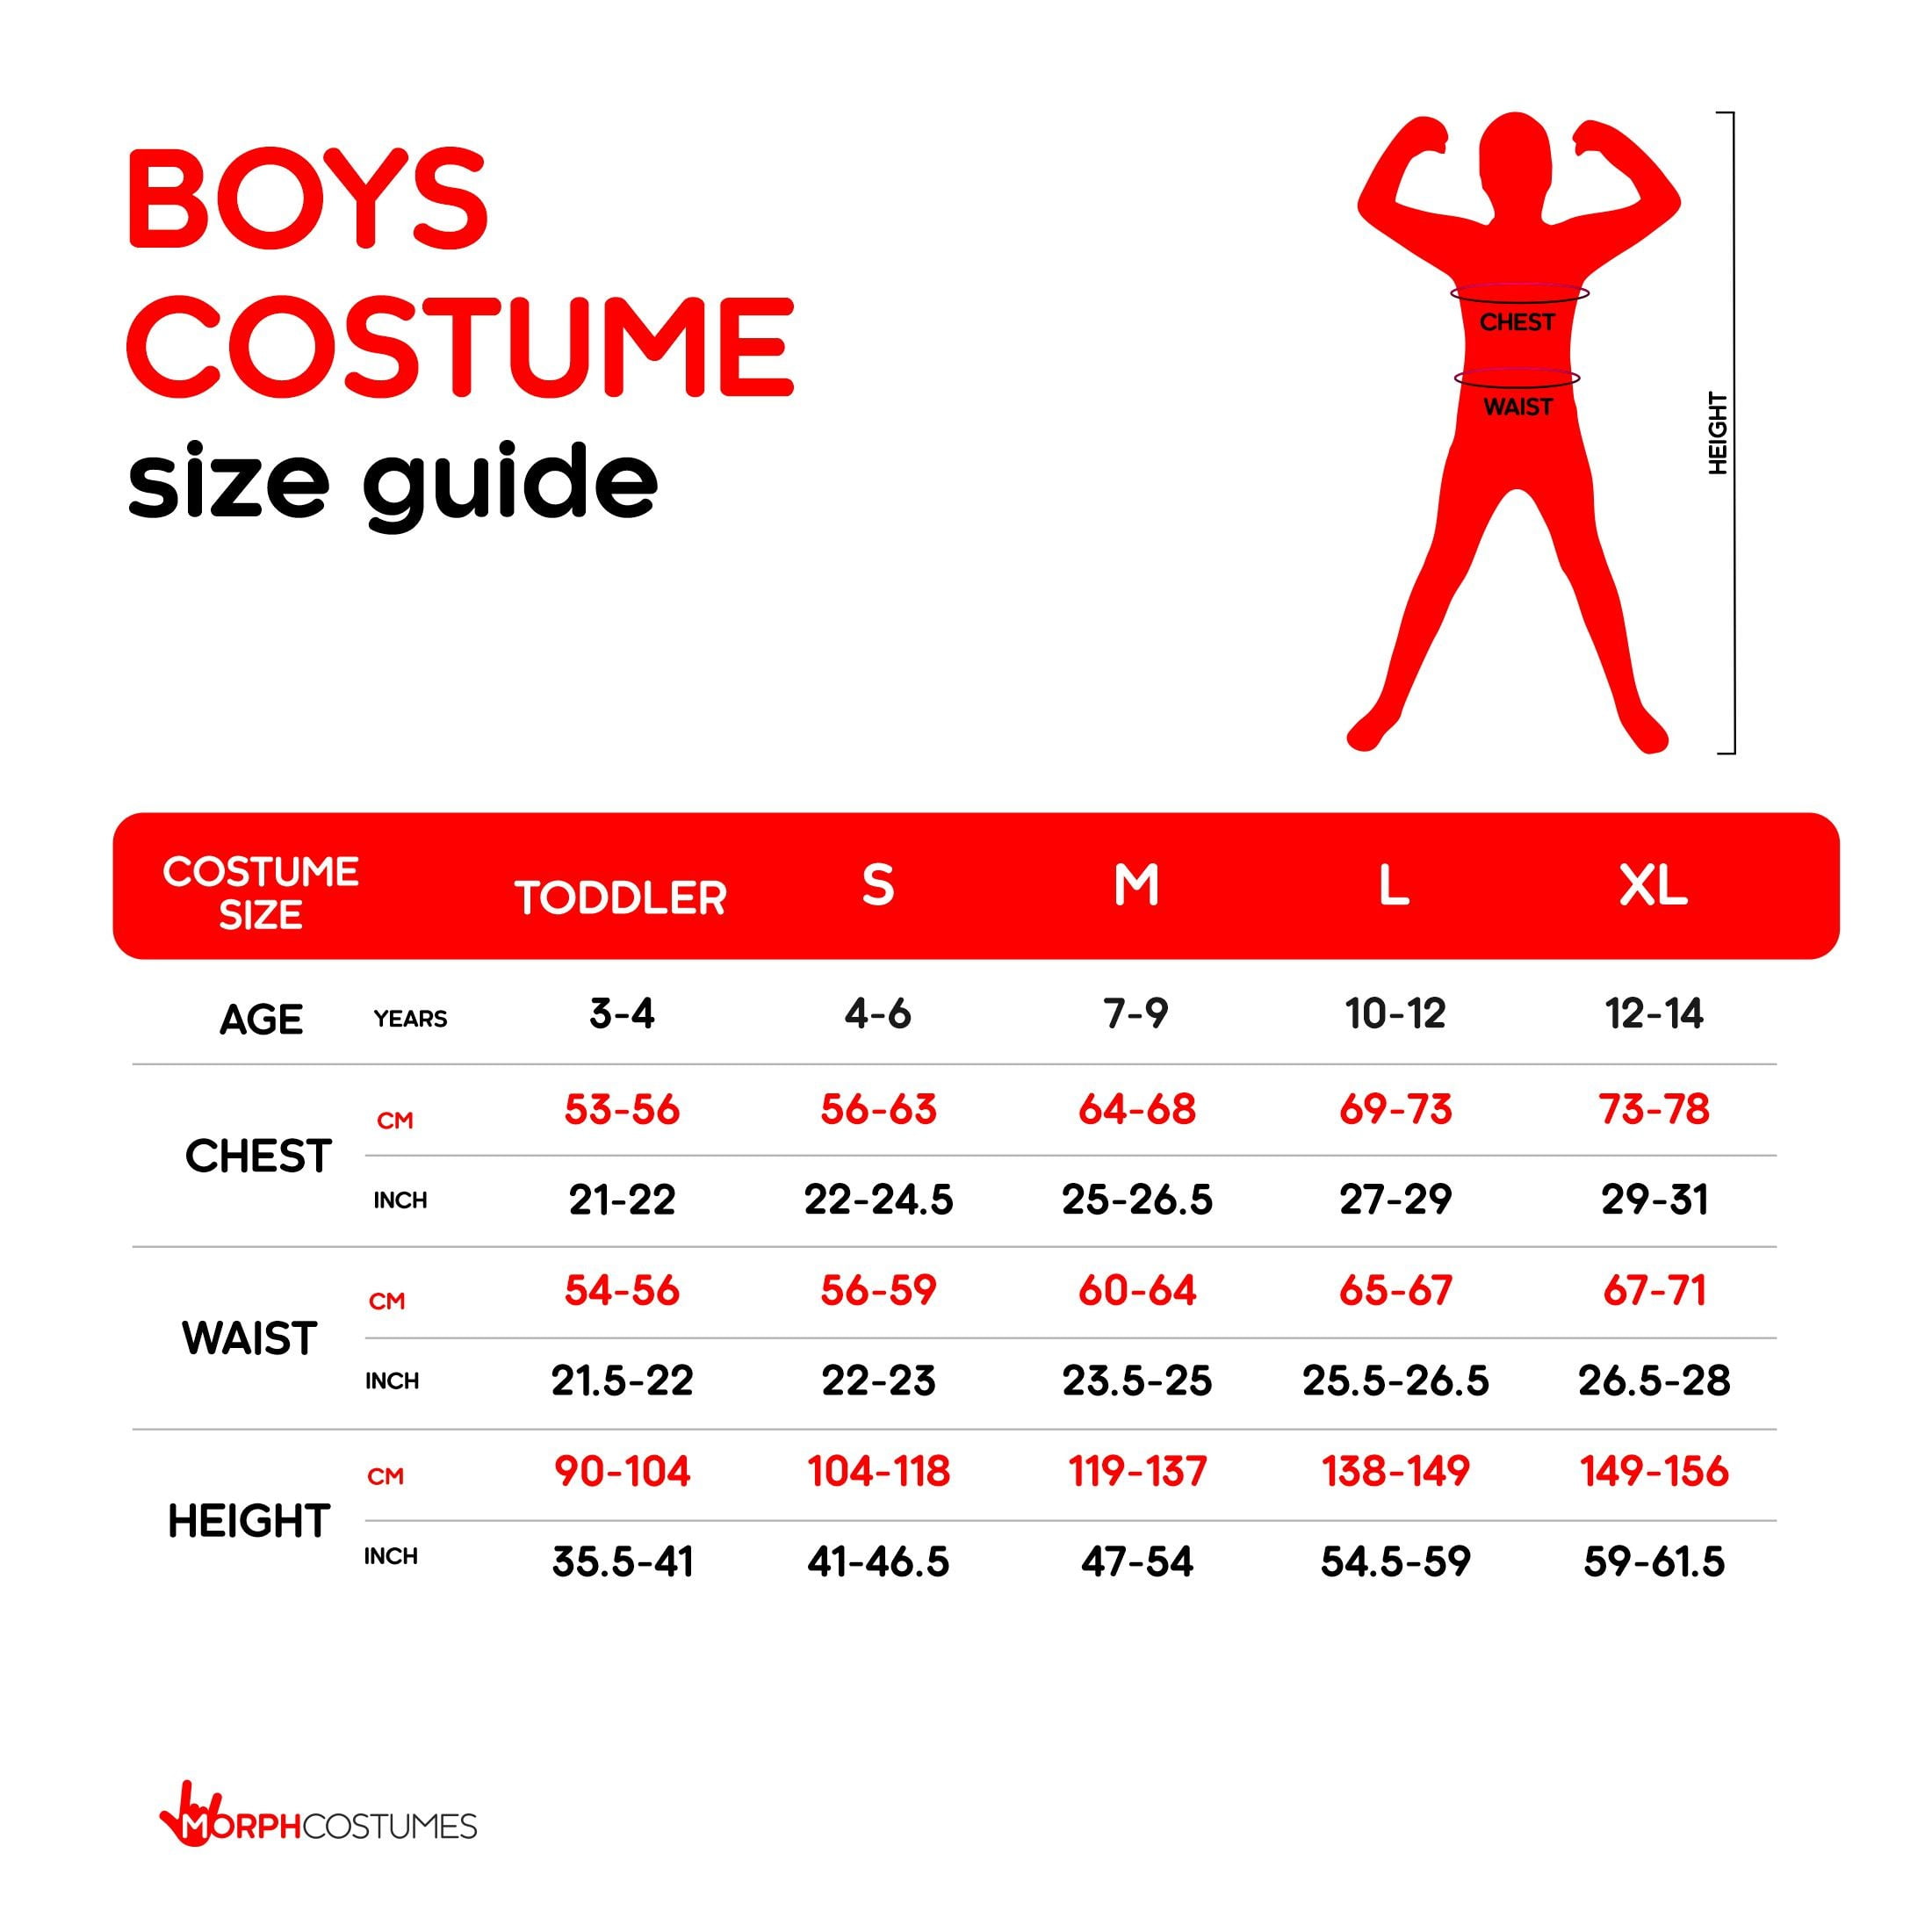  QIMYGIFT The Rake Costume for Kids Halloween Costume Scary  Bodysuit Dress Up Party Cosplay Boys Girls 4-14 Years : Clothing, Shoes 